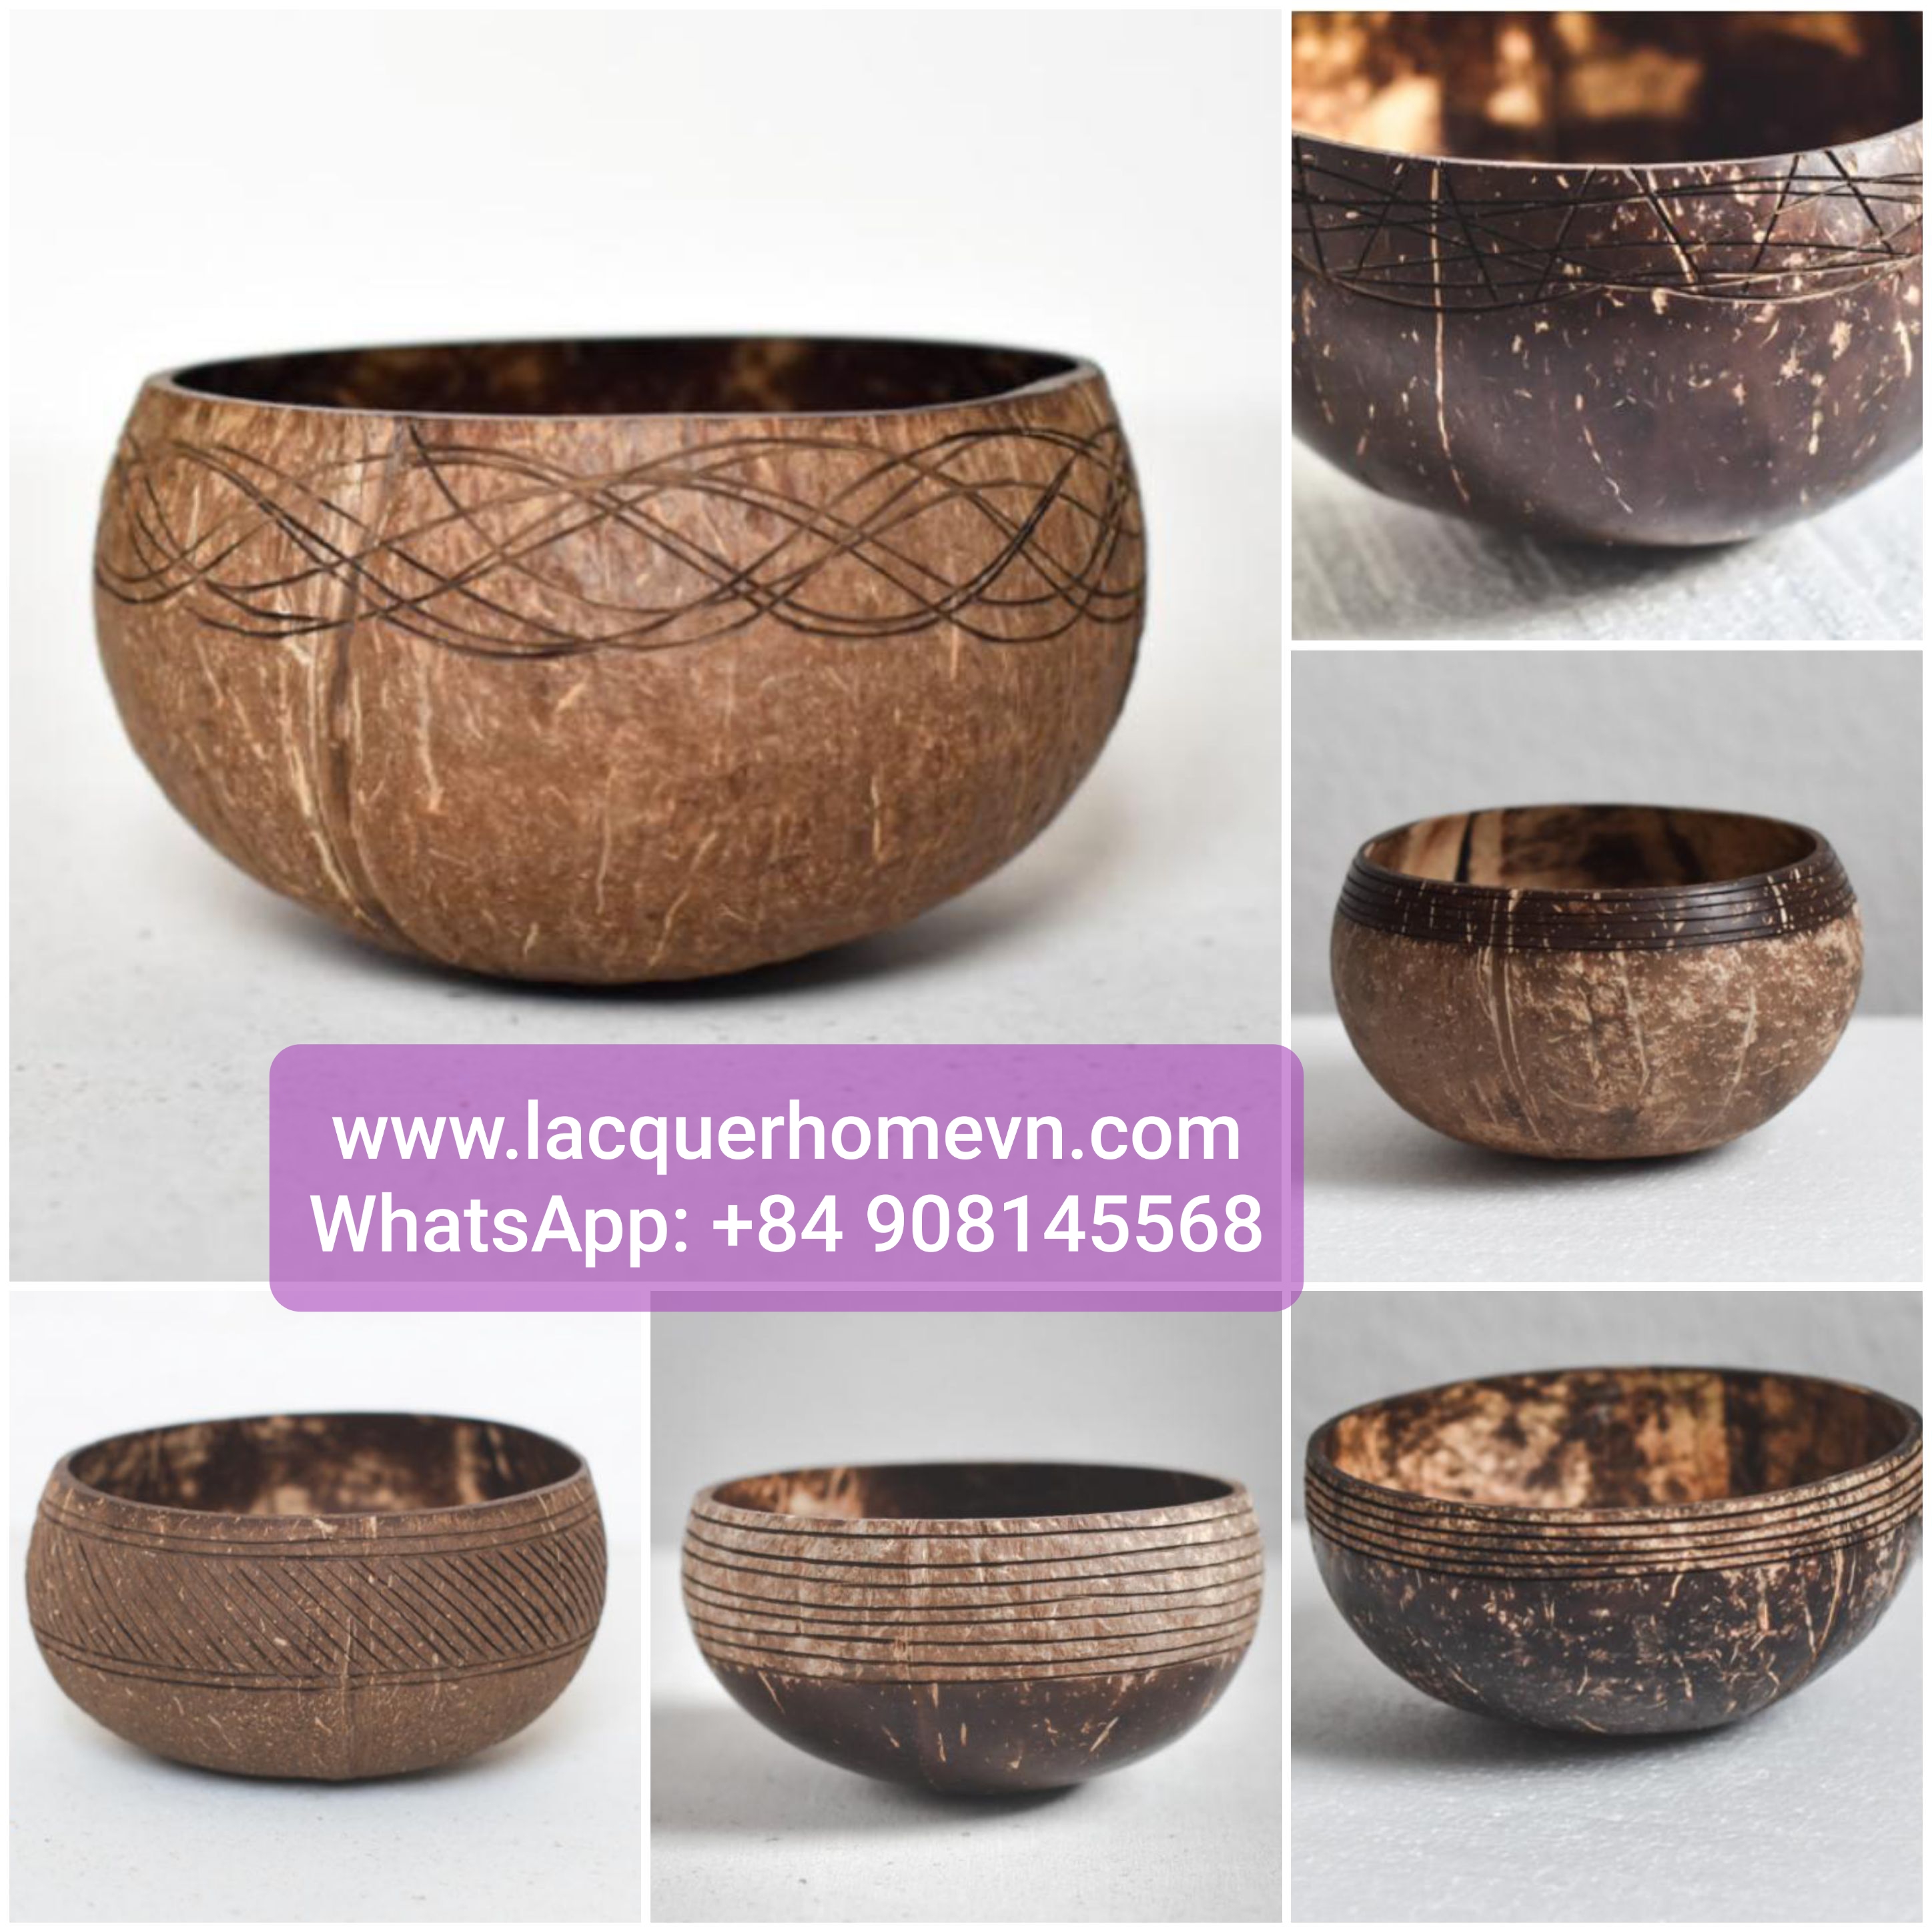 BEST SELLING ECO-FRIENDLY NATURAL COCONUT SHELL BOWL